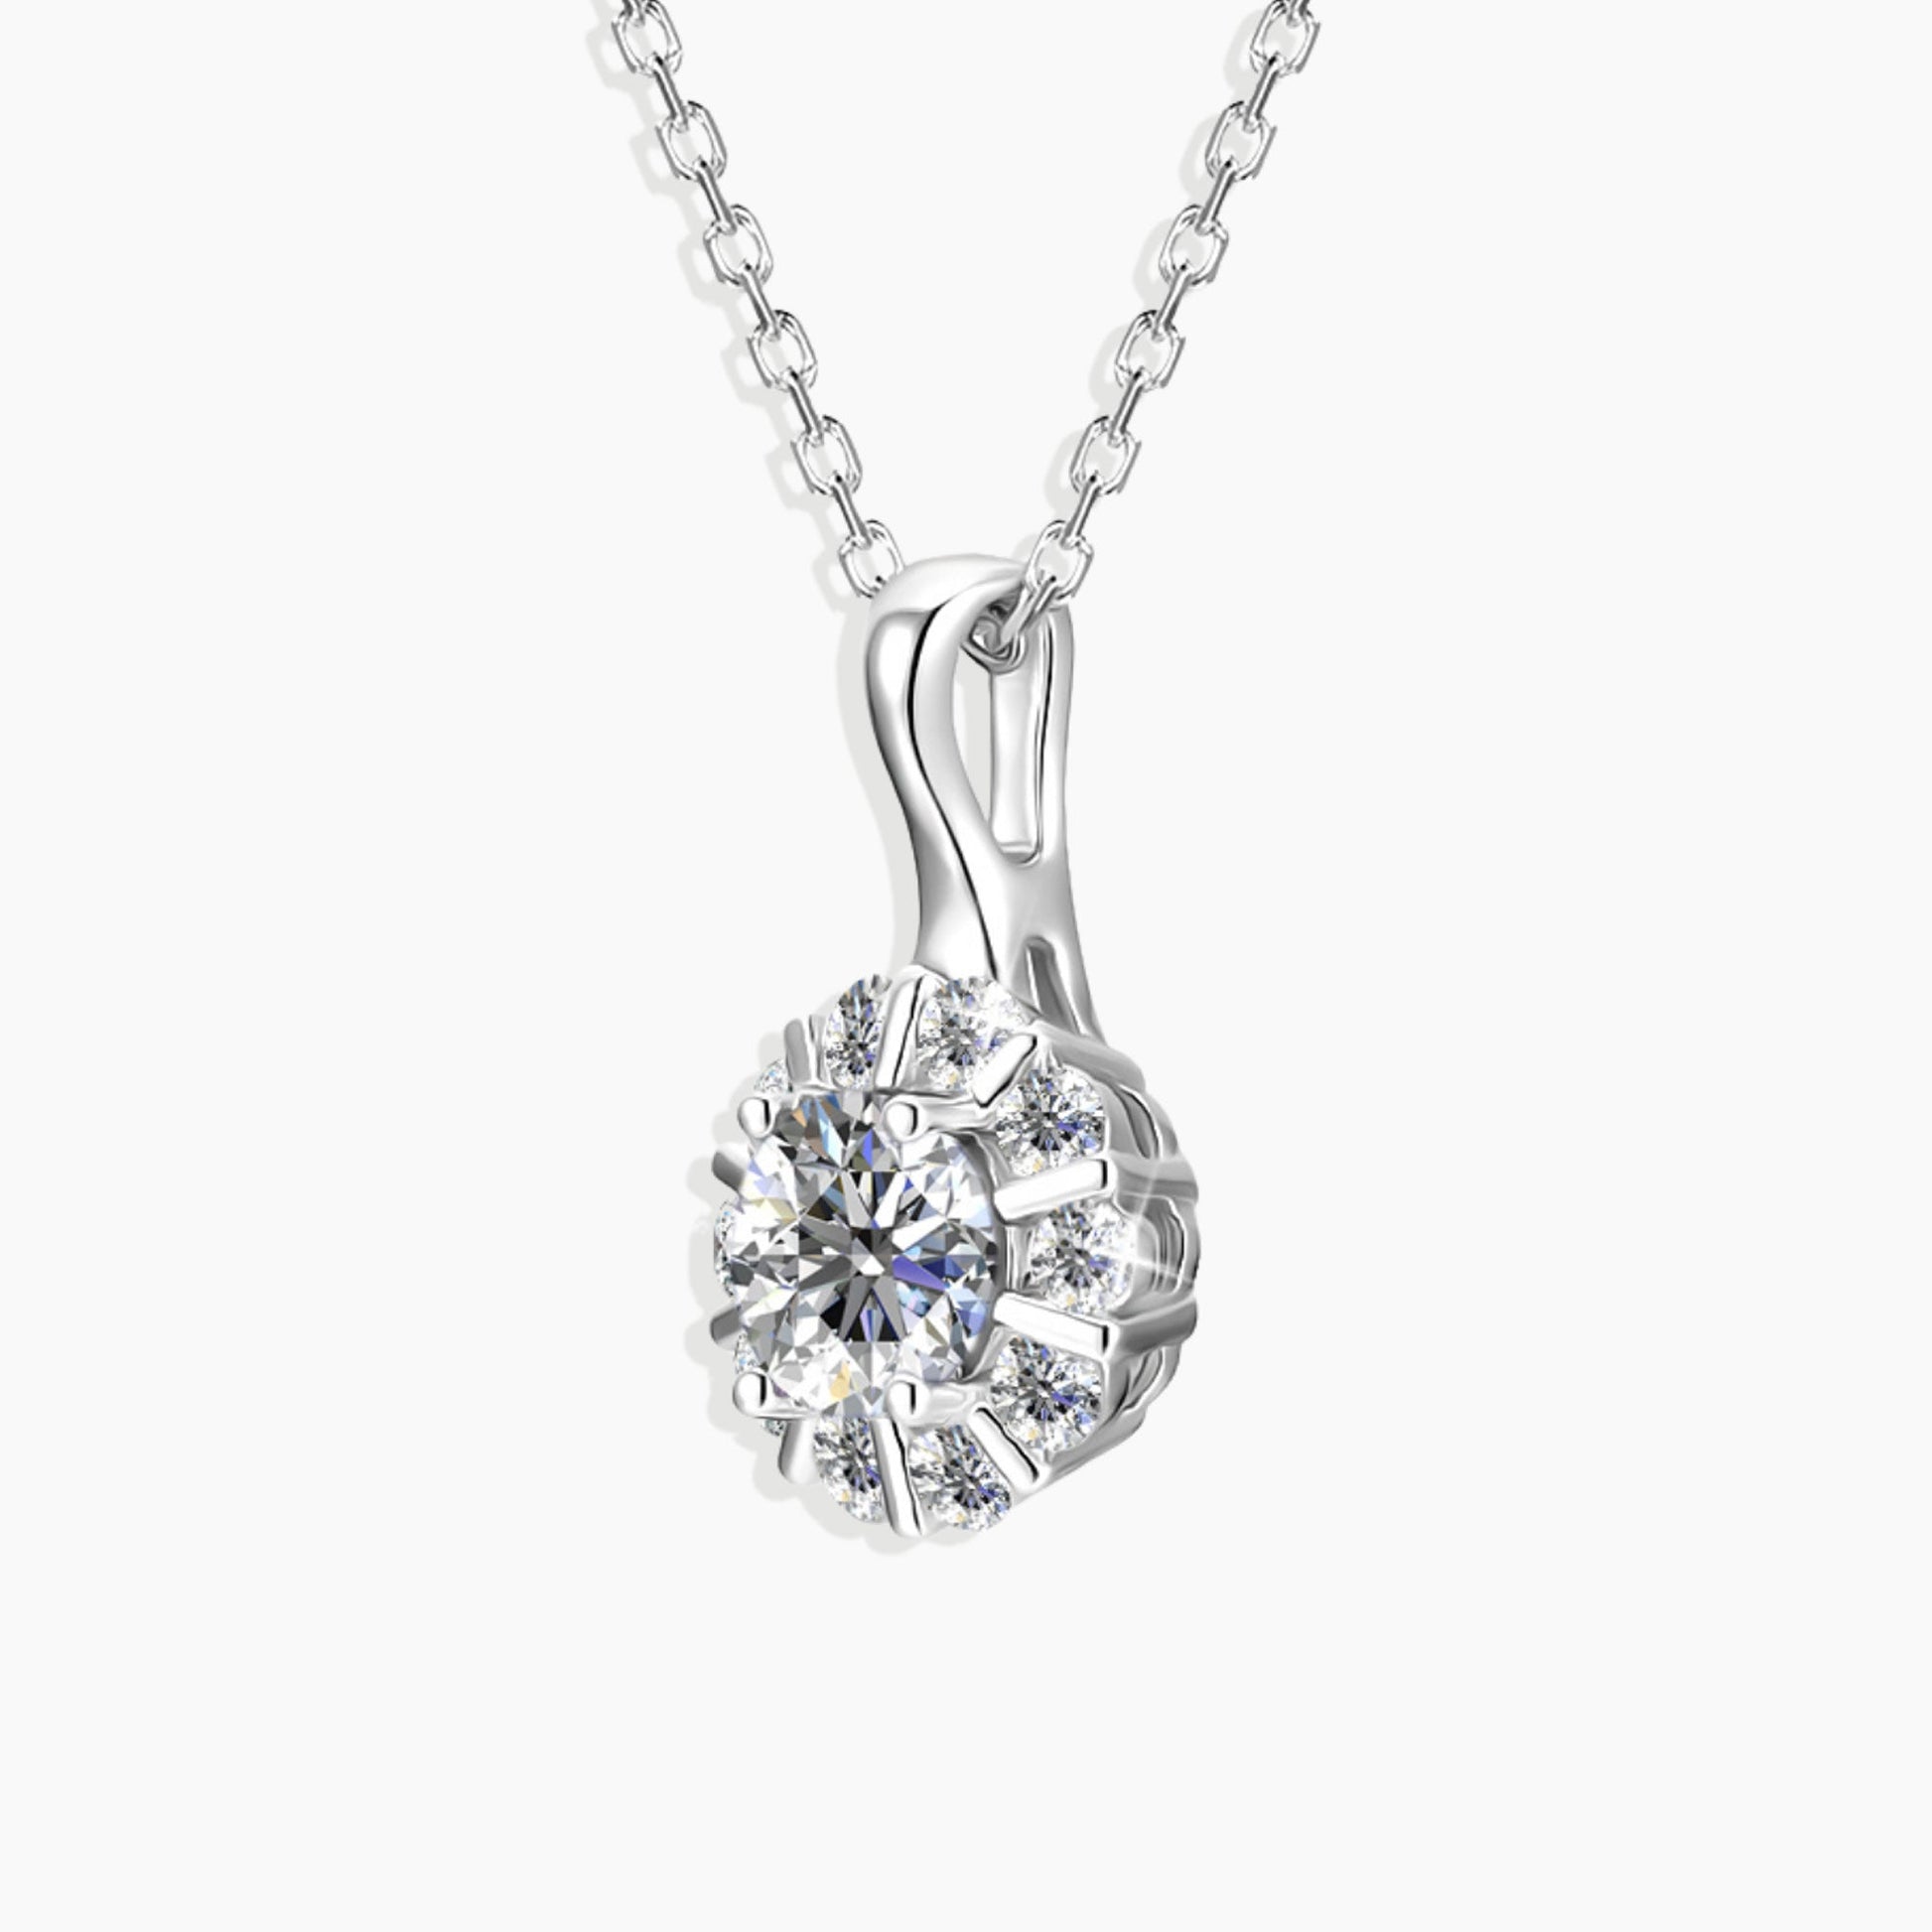 Side view of the Moissanite Sparkle Pendant Necklace, highlighting its elegant design and craftsmanship.